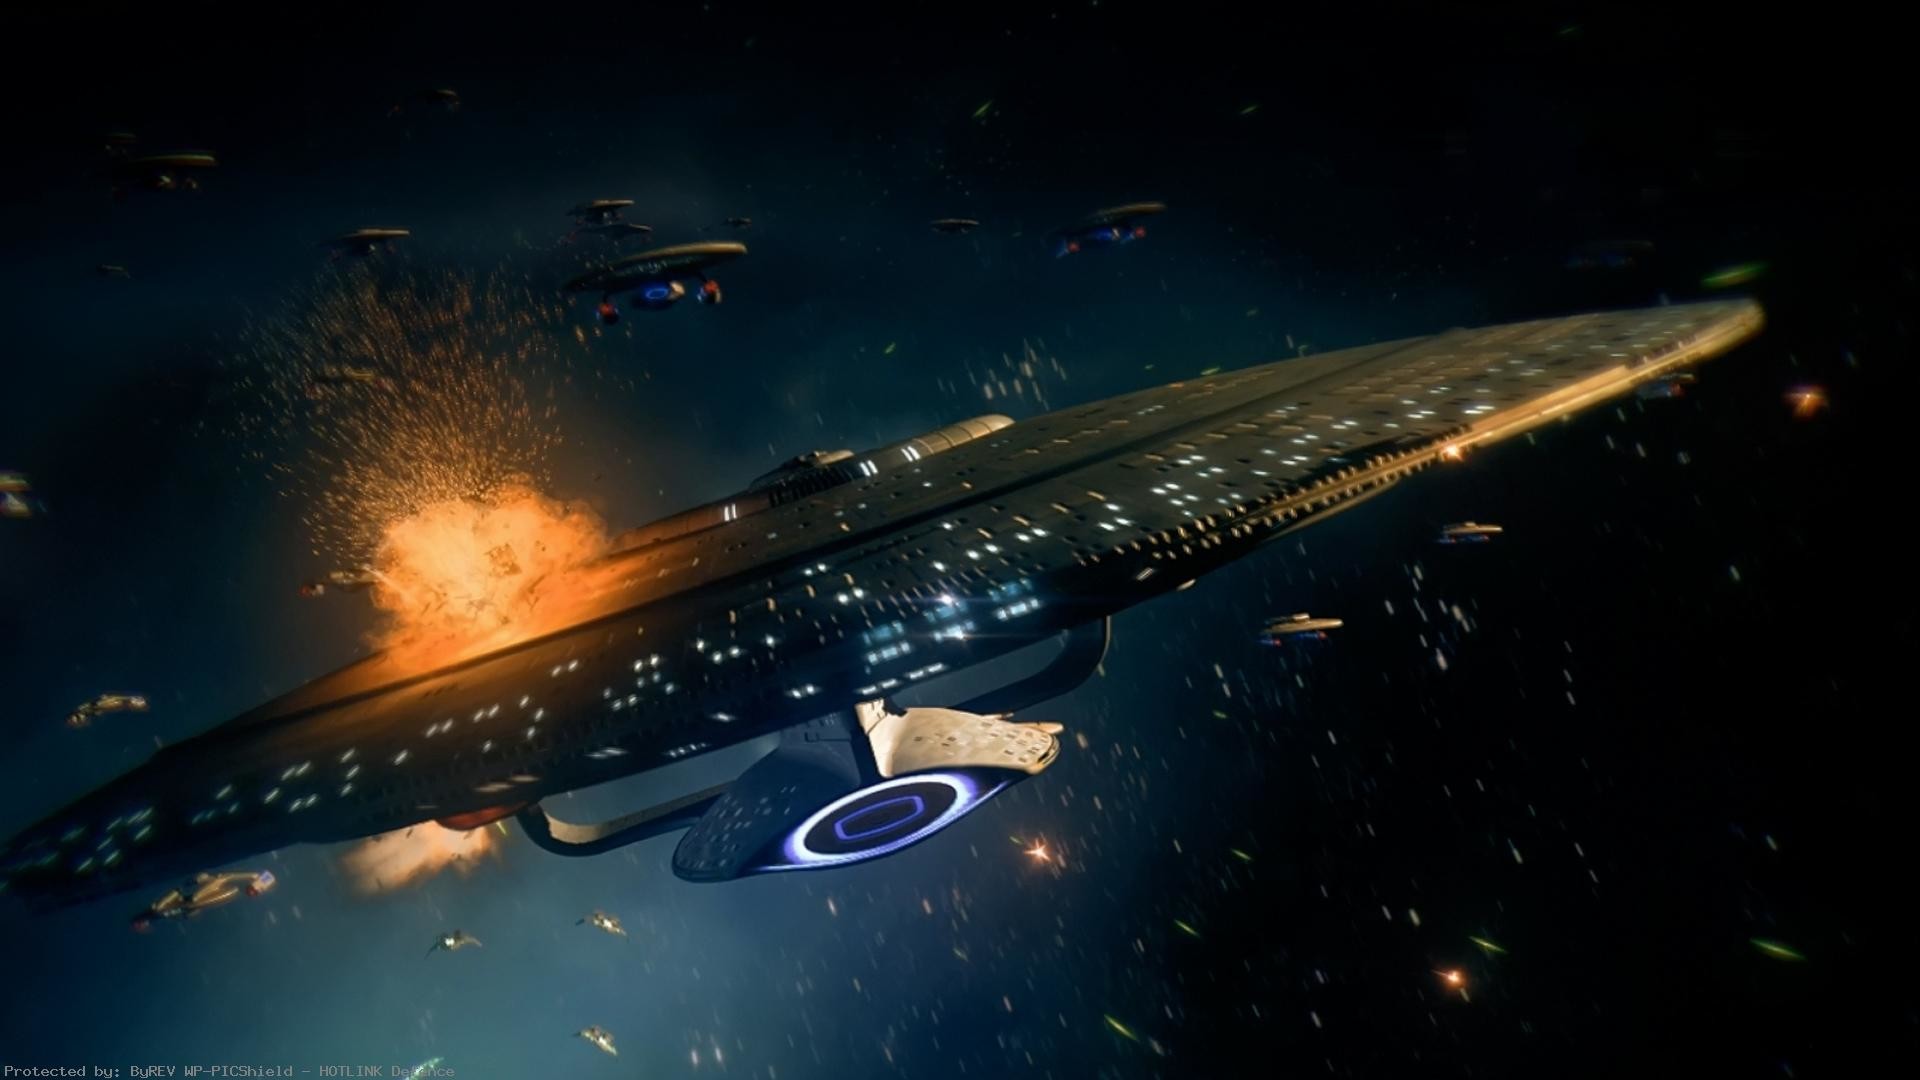 The-Galaxy-class-Enterprise-D-from-the-Star-